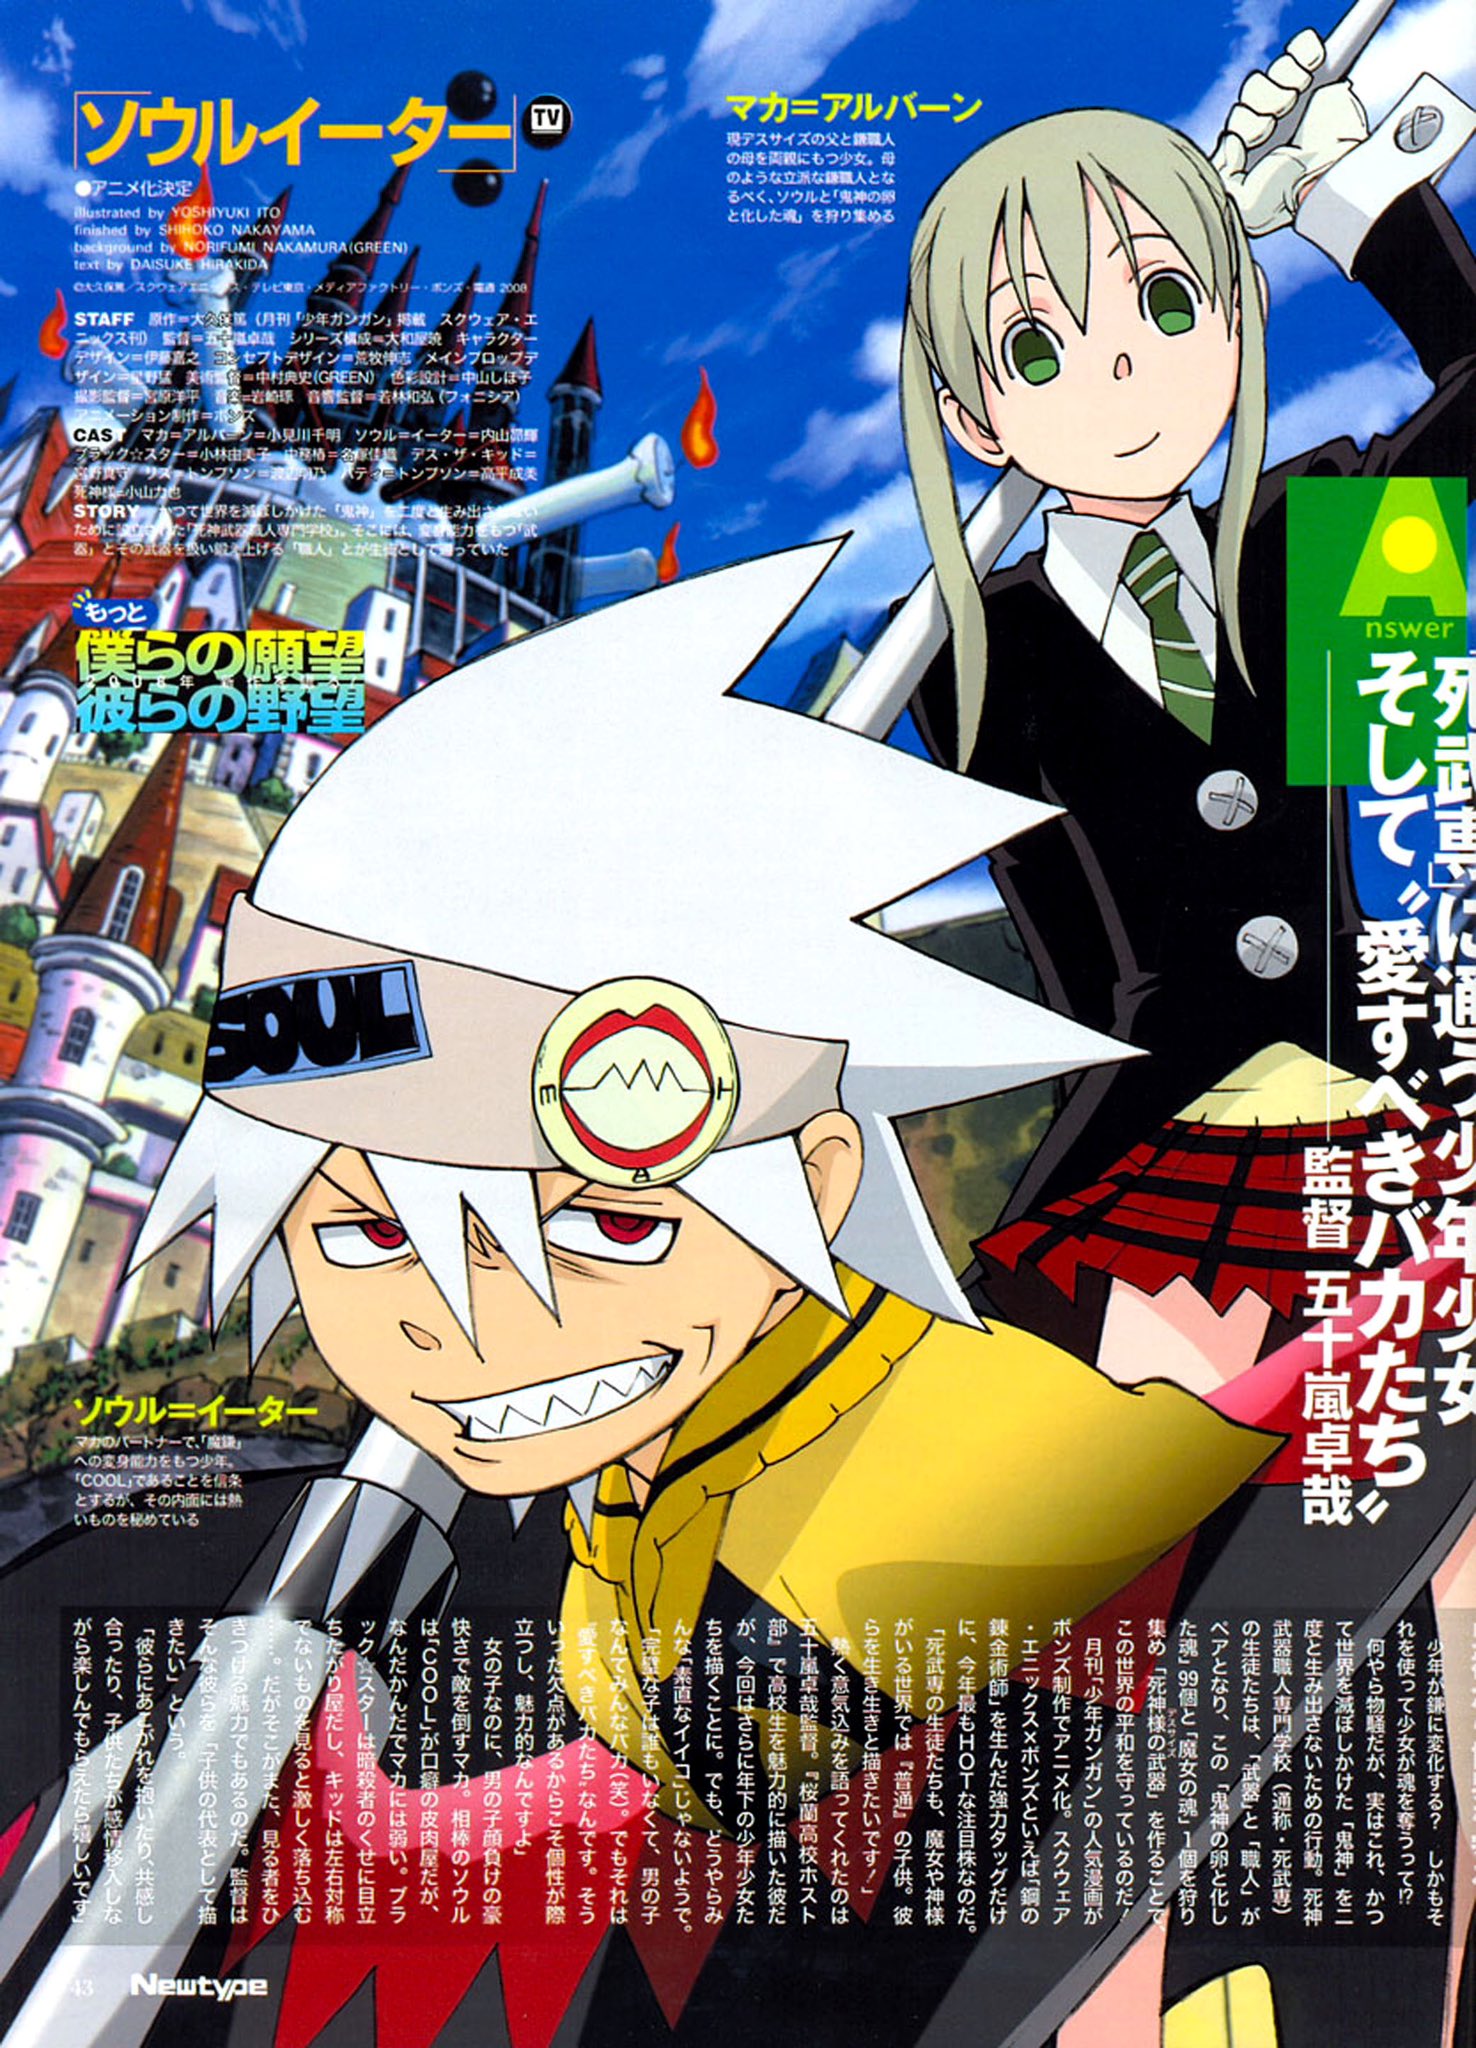 Is a Soul Eater Reboot Confirmed? on X: Day 3,500 There is no